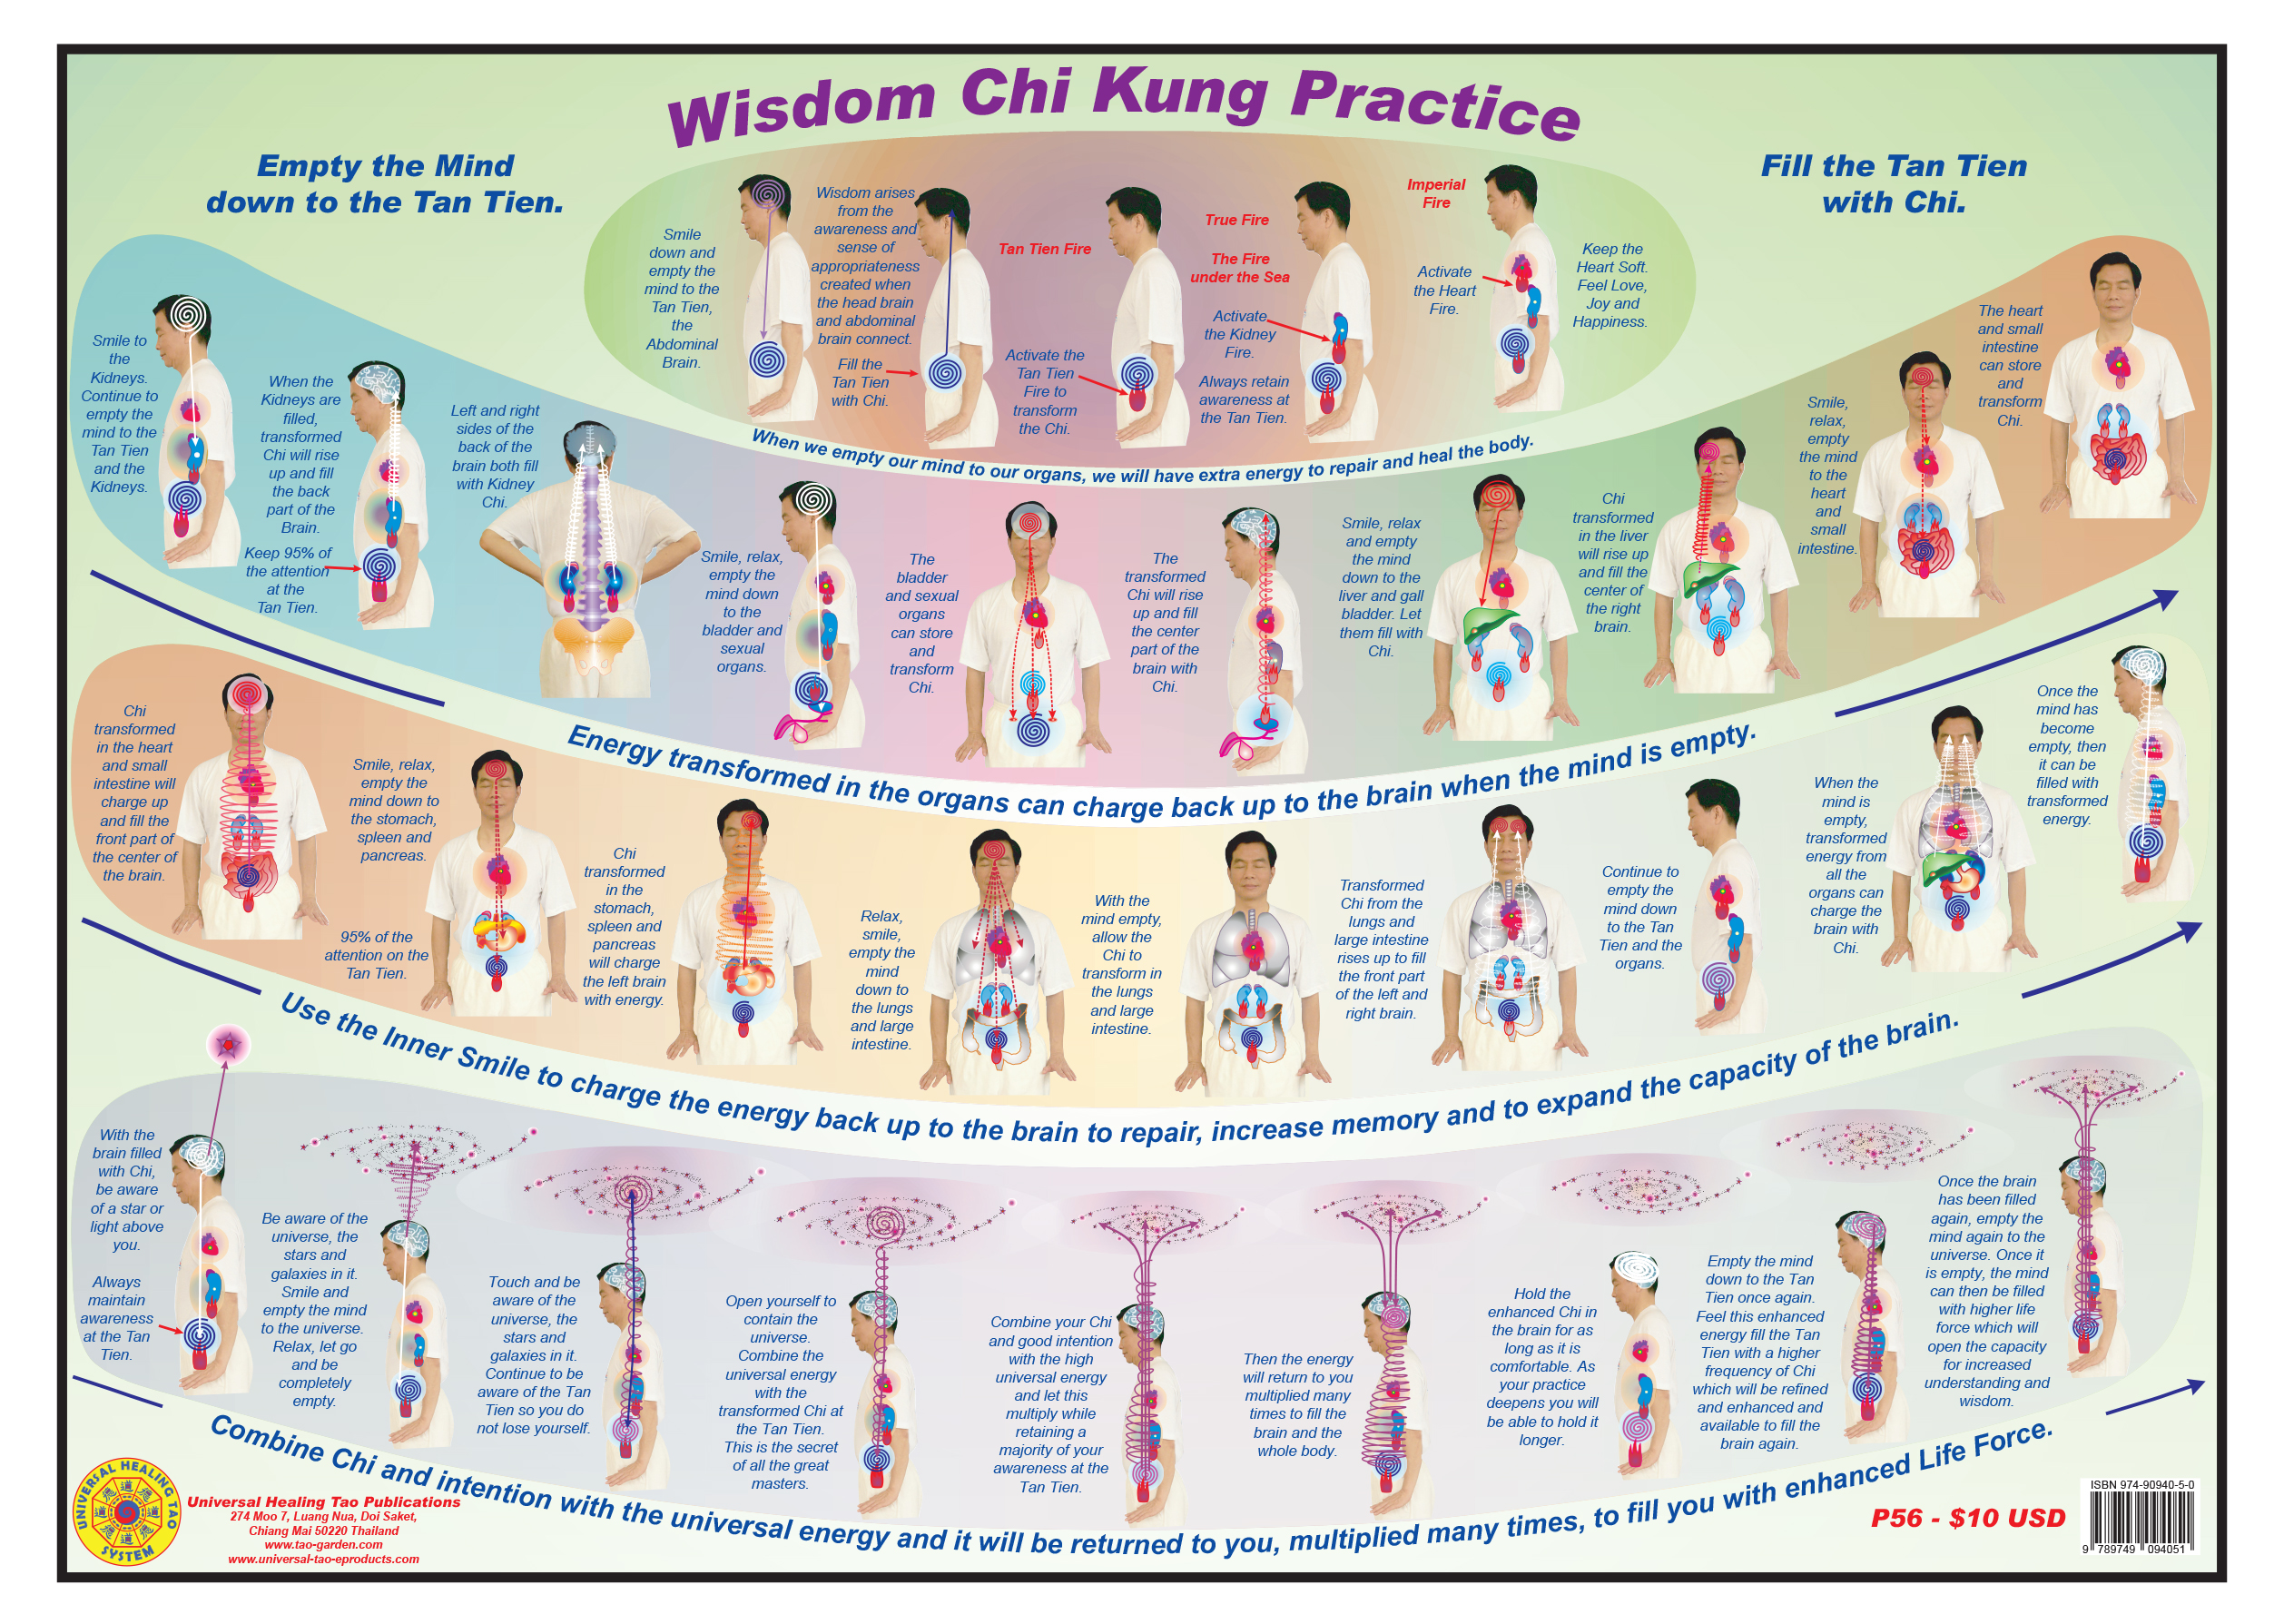 Wisdom Chi Kung Practice (E-Poster) [DL-P56]